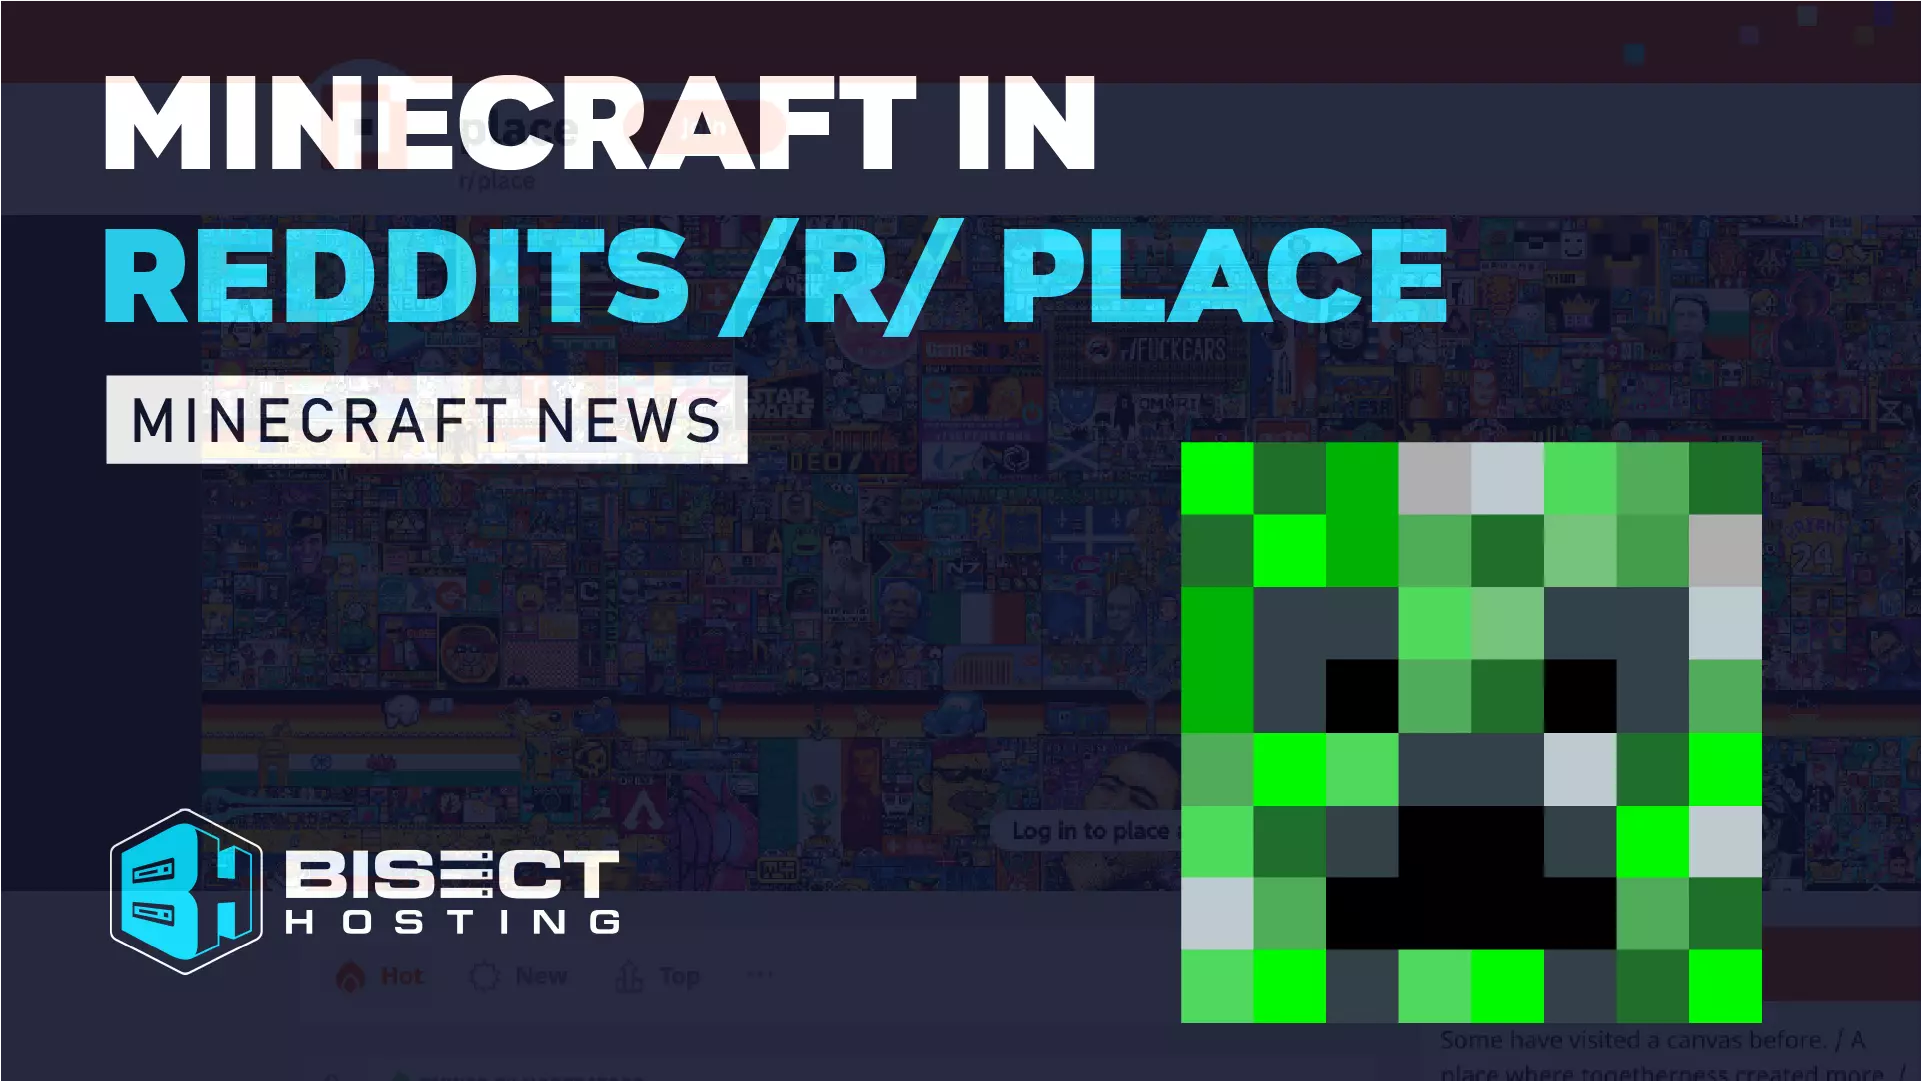 Minecraft in Reddit’s /r/place - Creepers, MCC, Streamers, & More